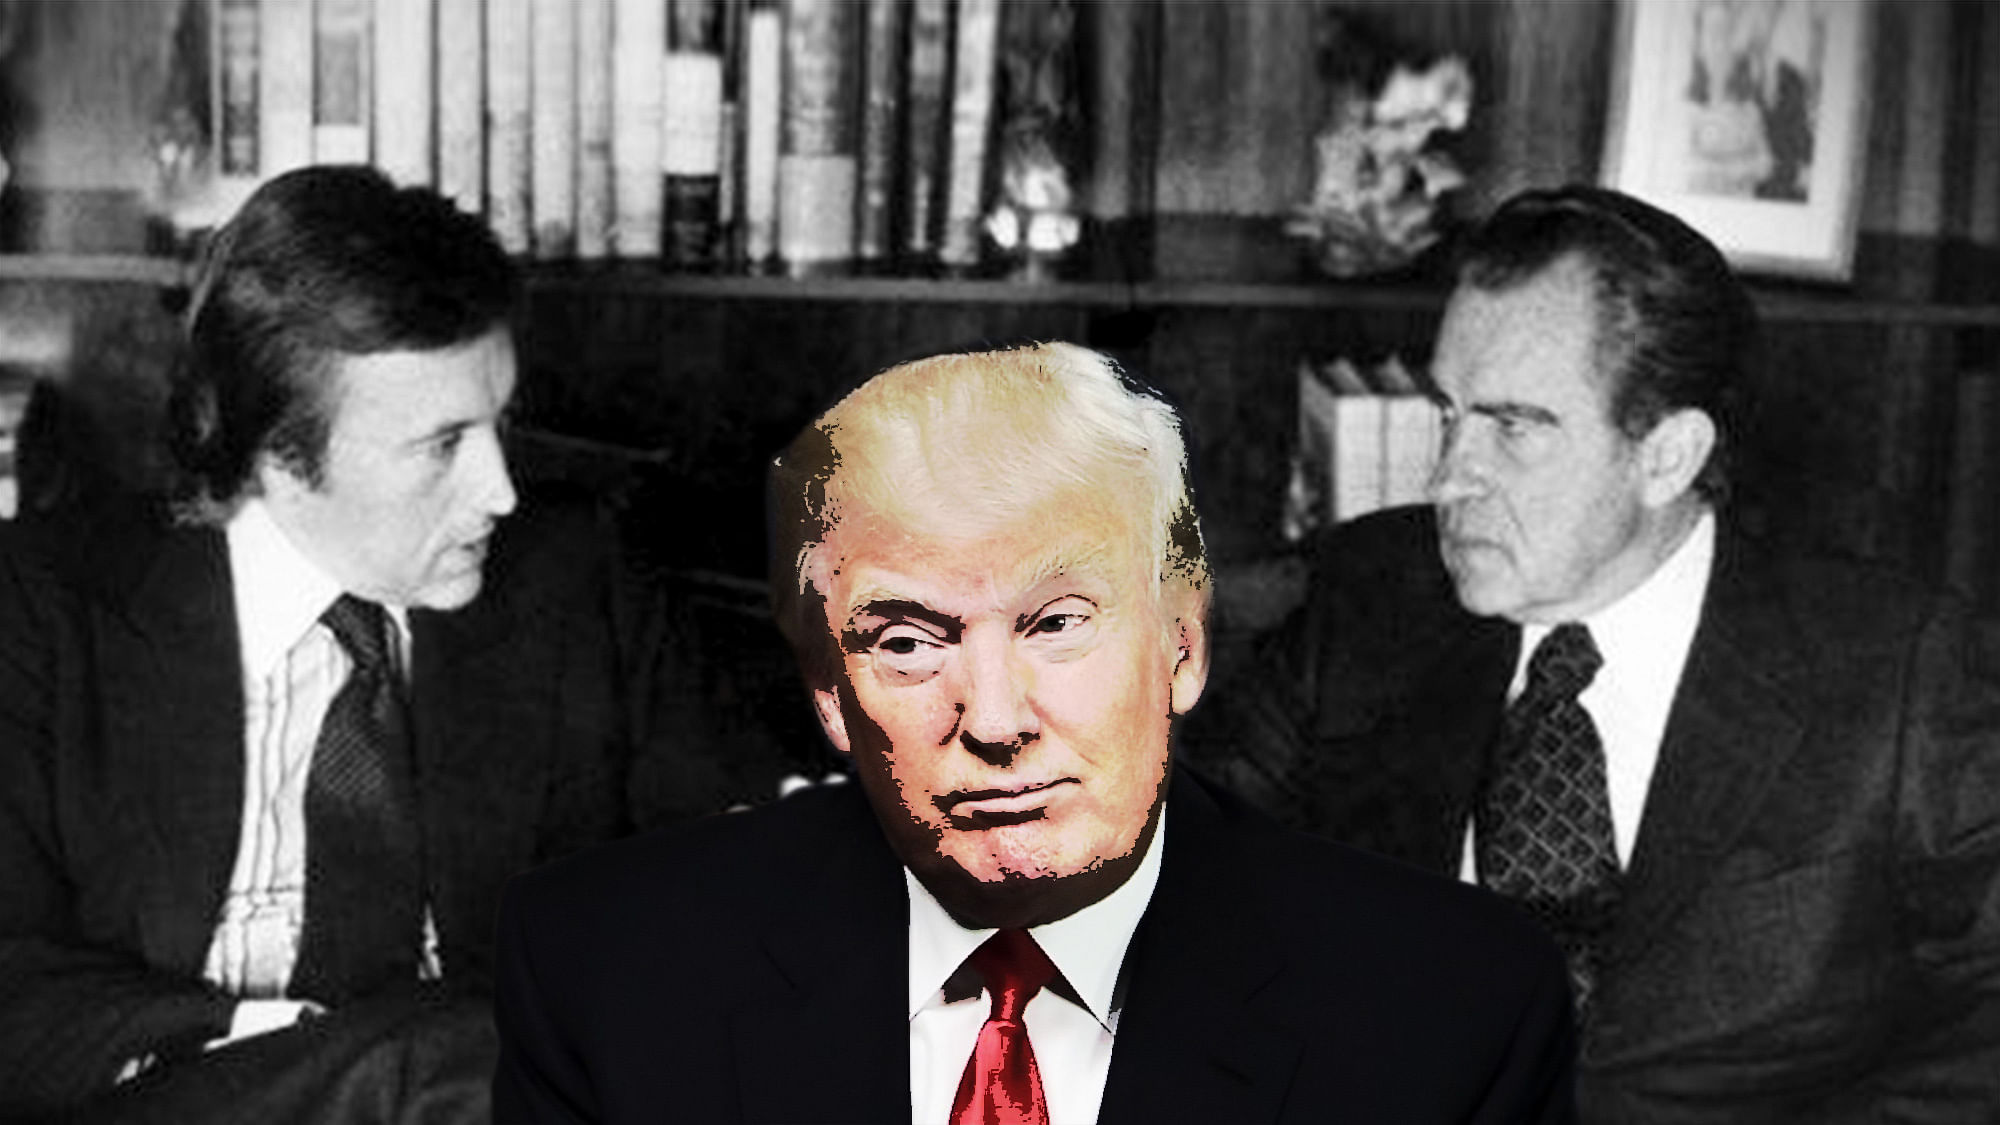 Is Donald Trump going be America’s next rogue president, after Nixon? (Photo: <a href="https://commons.wikimedia.org/wiki/Main_Page">Wikimedia Commons</a>, altered by The Quint)